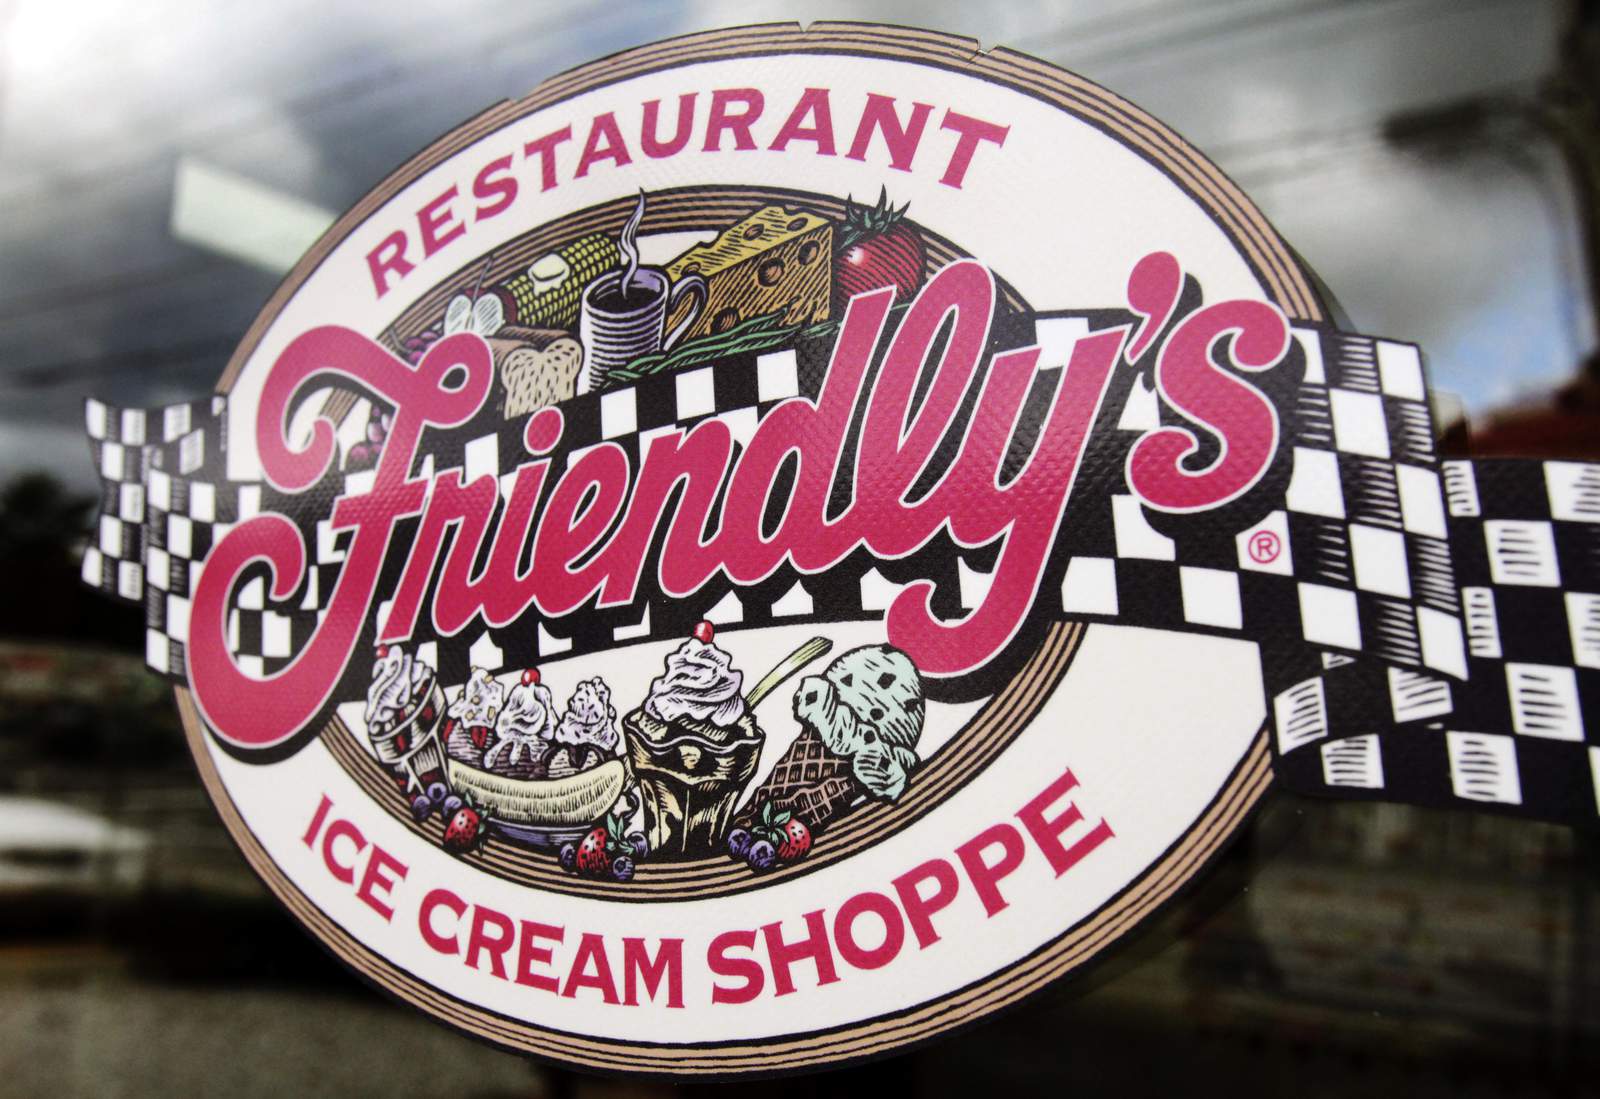 Another restaurant chain, Friendly's, stumbles in pandemic